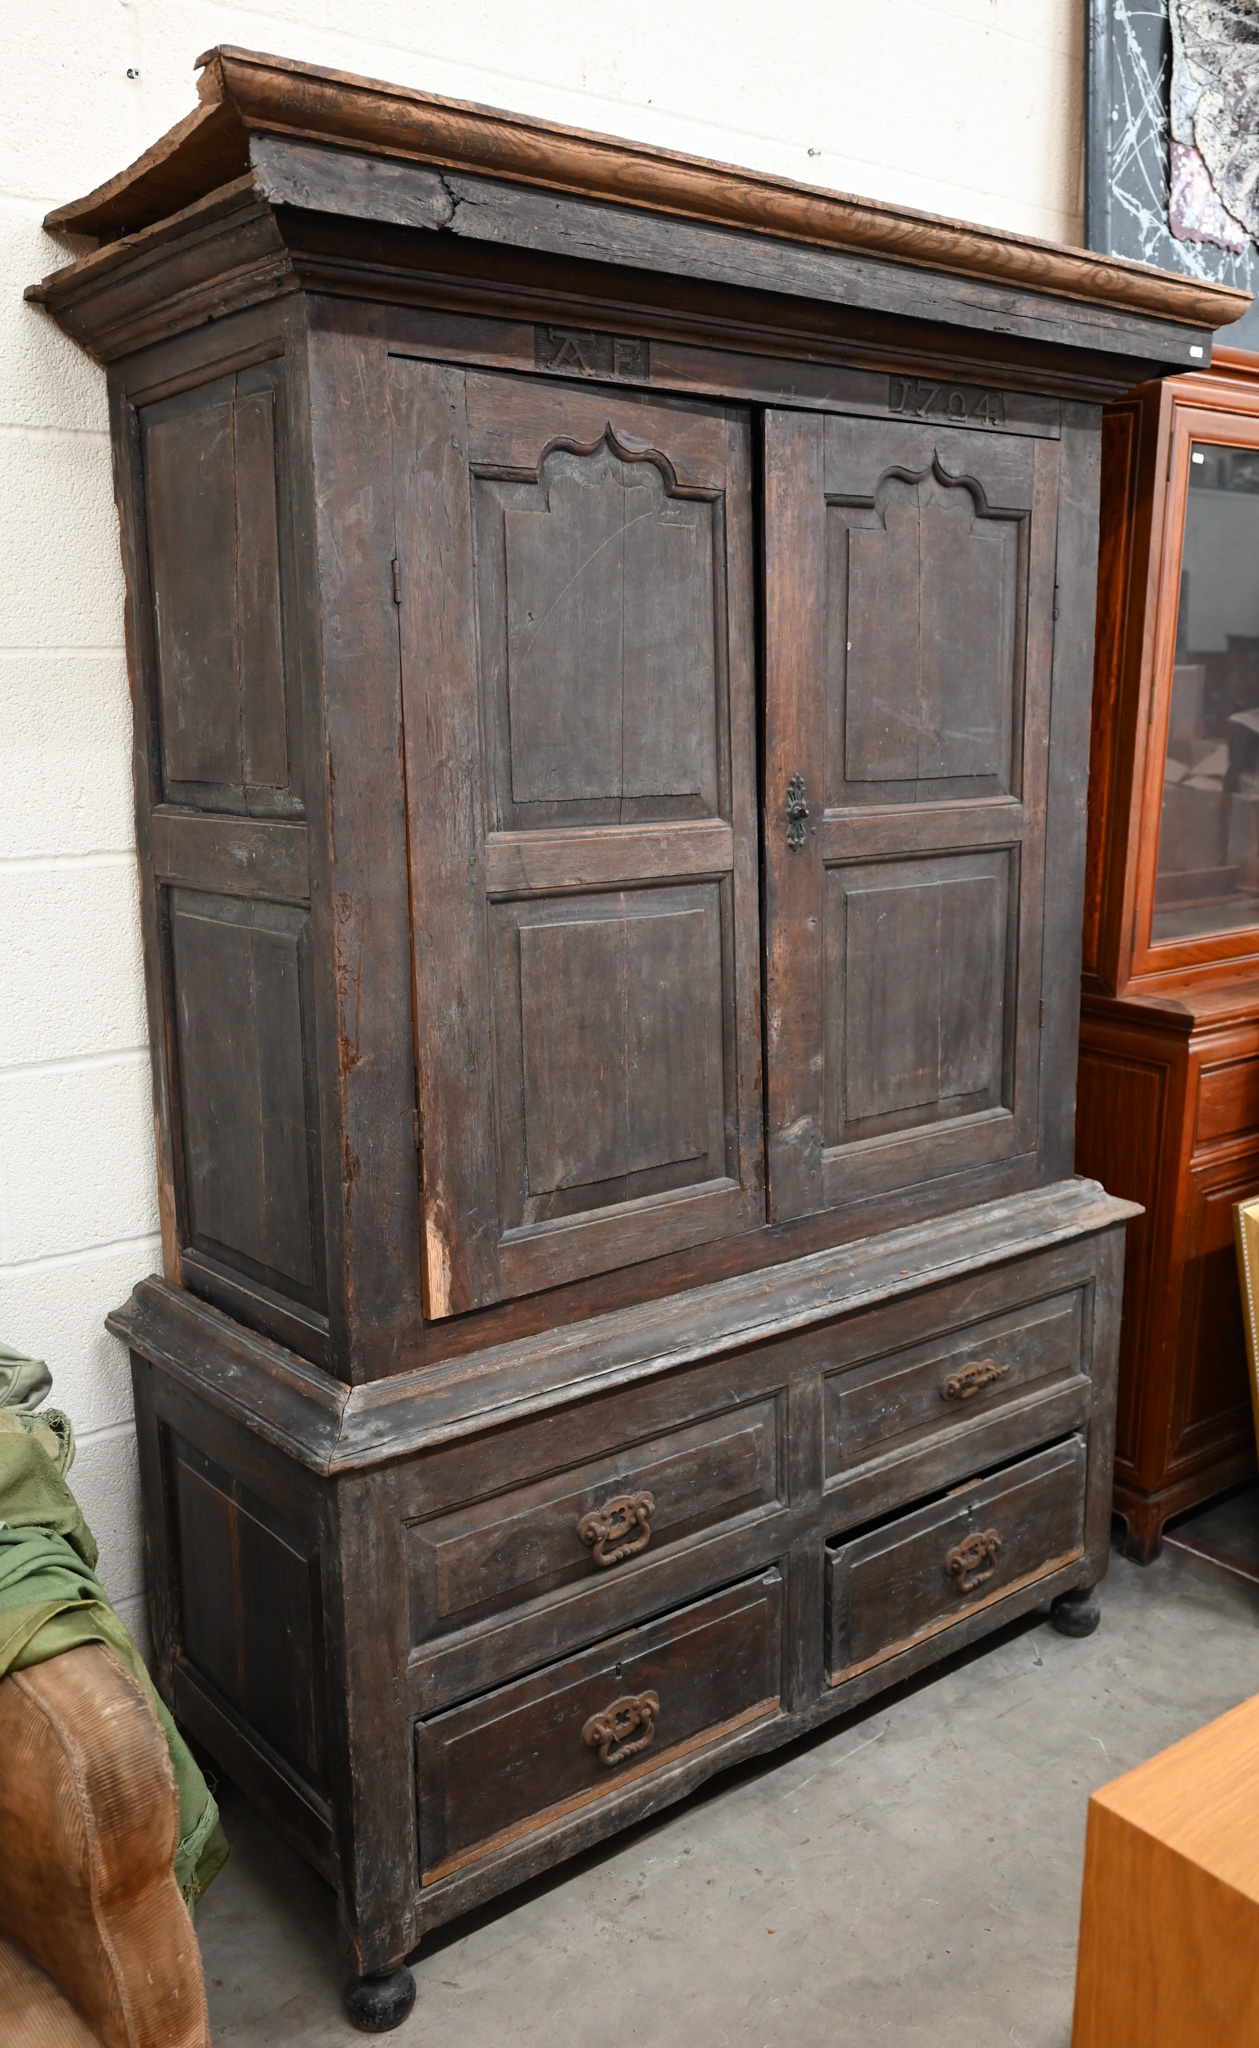 An 18th century and later oak livery cupboard with panelled doors on base with two drawers below